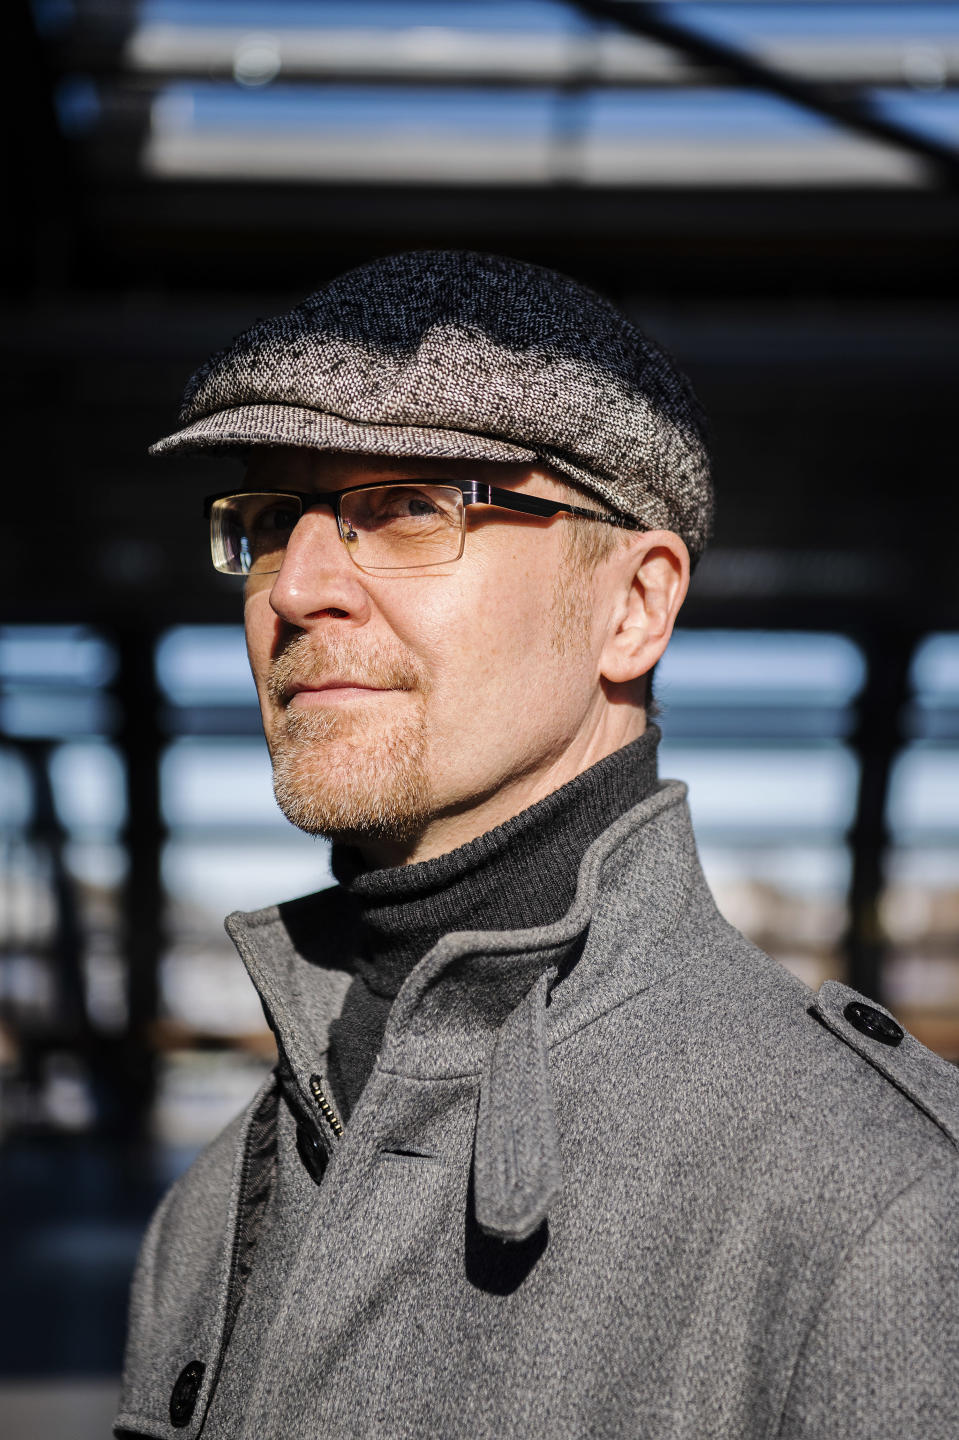 Jussi Lassila, a senior researcher at the Foreign Policy Institute, was photographed near Tikkurila station on March 4.